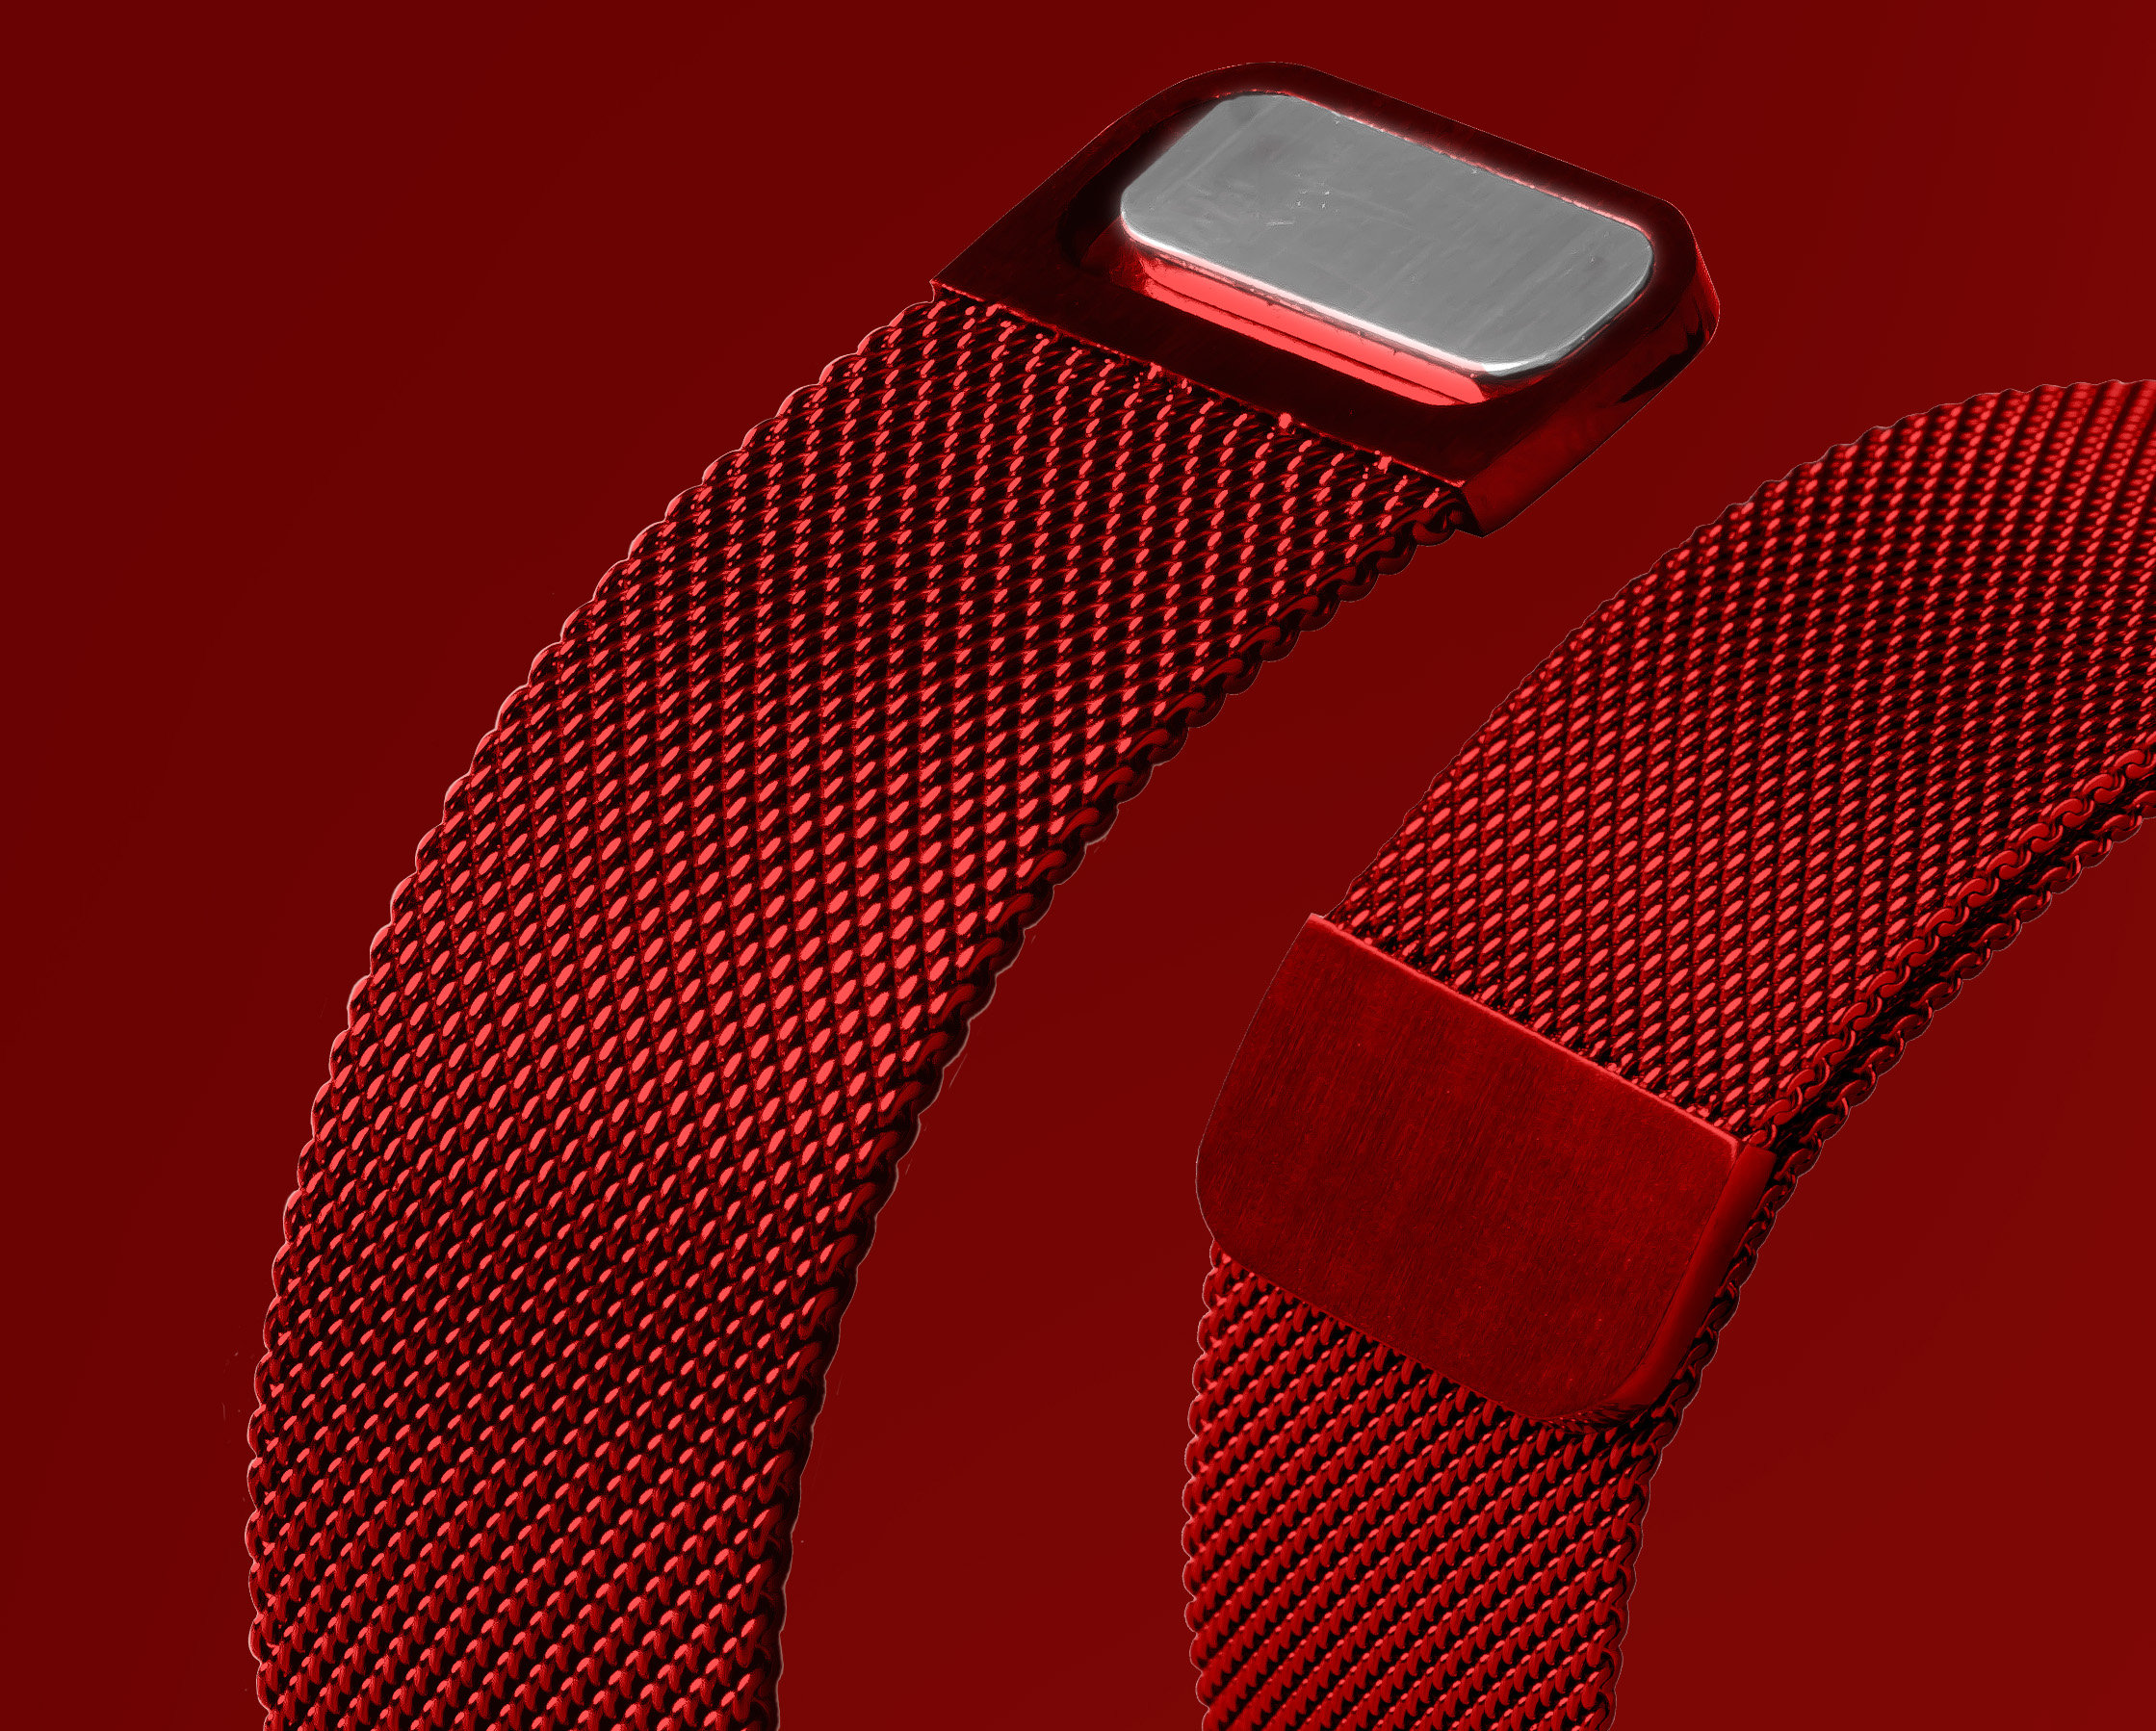 ANTI-FADING COATING ON FULLY MAGNETIC WATCHBANDS